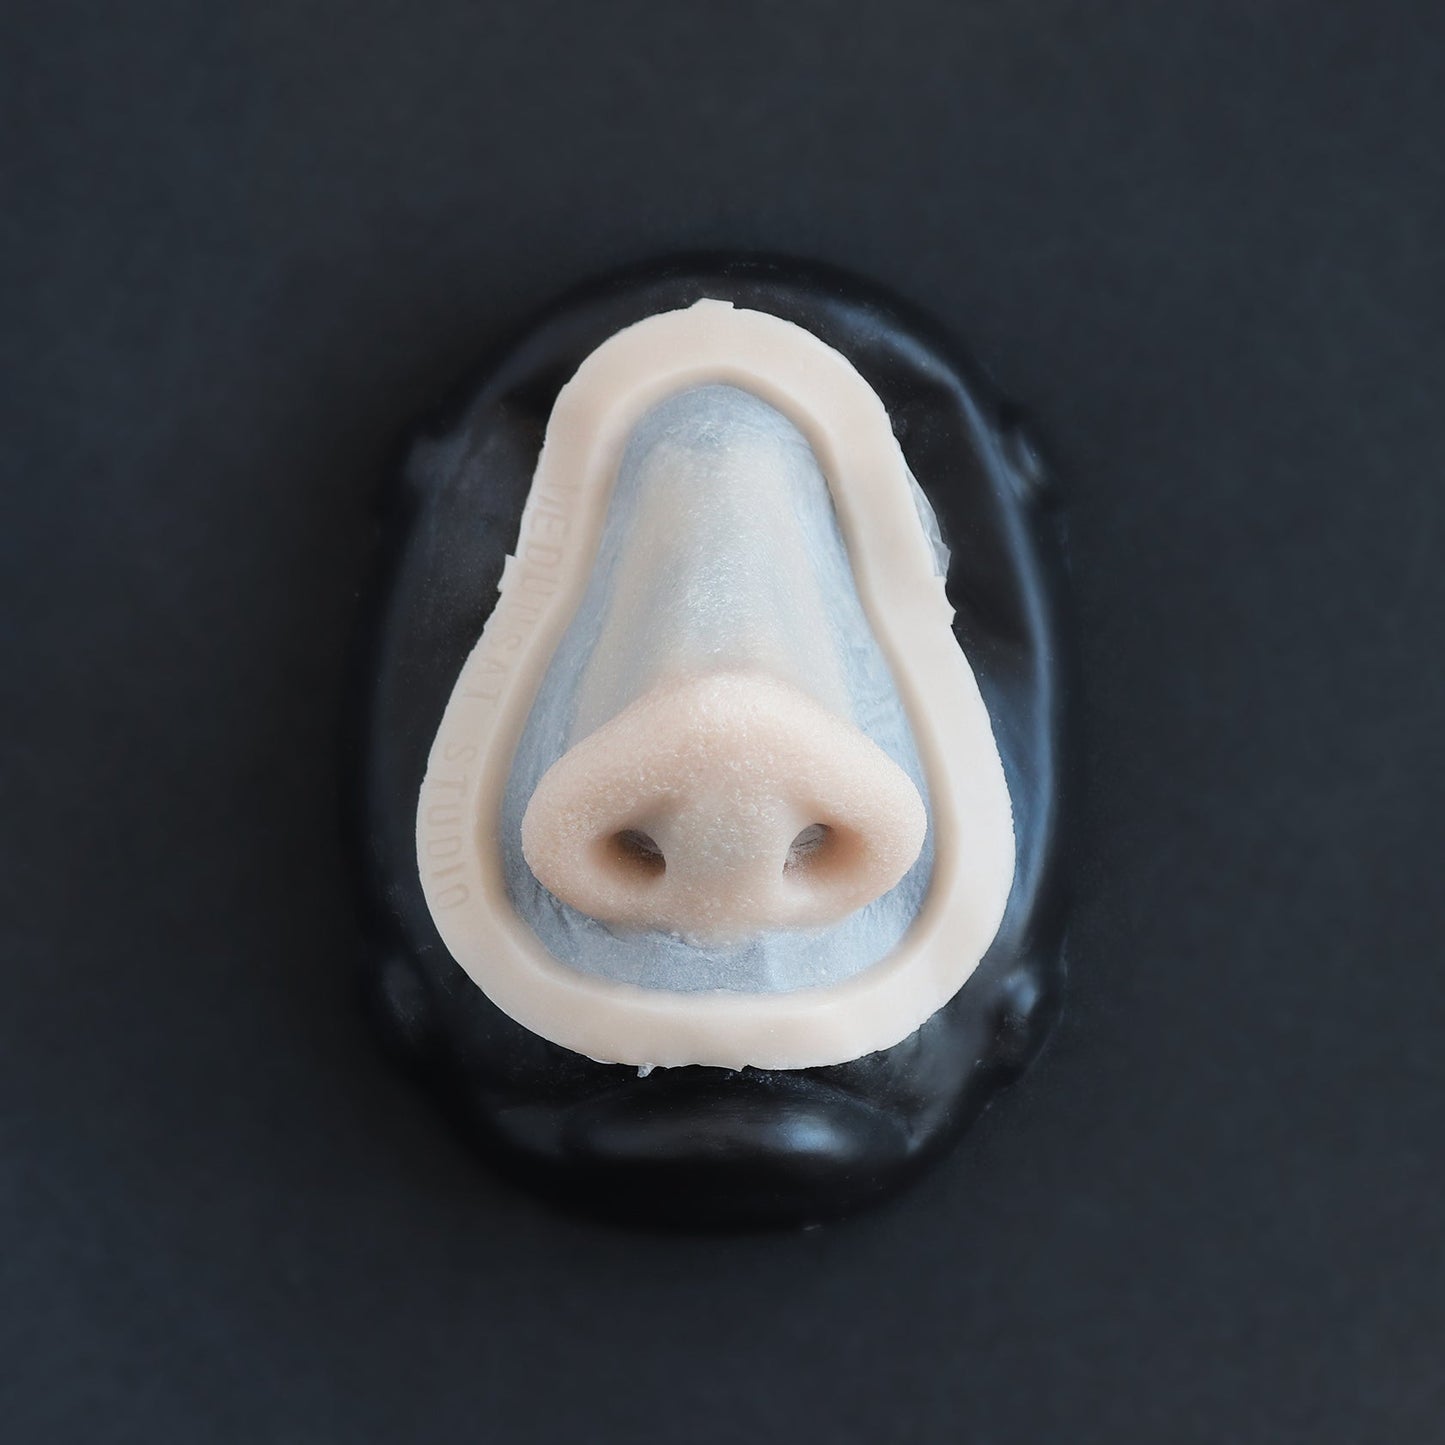 Piglet Nose - Silicone makeup prosthetic in vanilla shade on a black surface